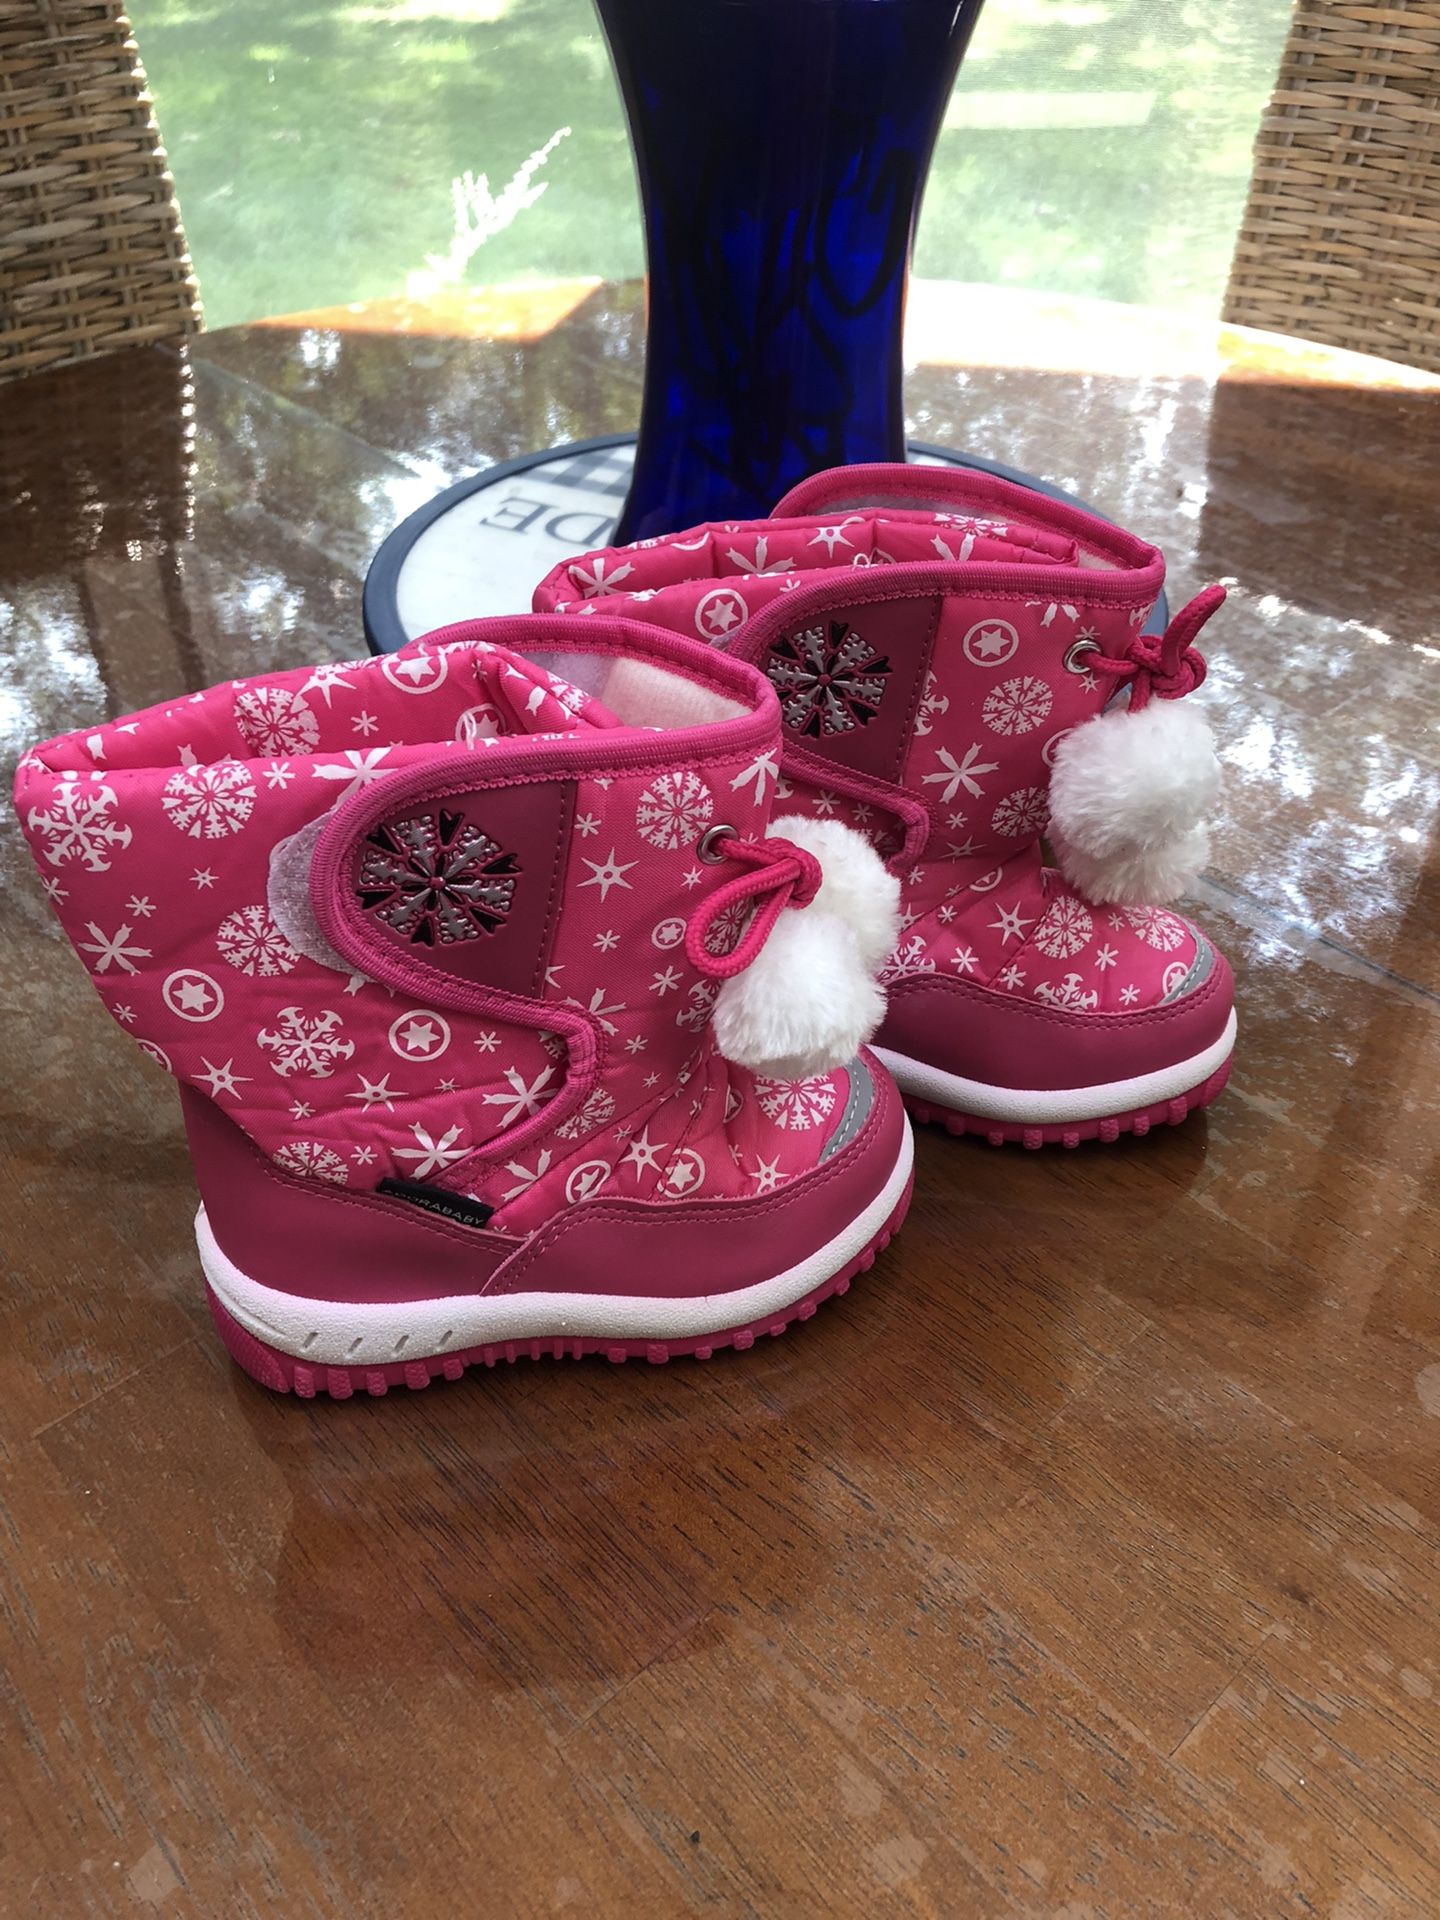 Toddler Winter Boots, Snow Insulated. New , Size 8